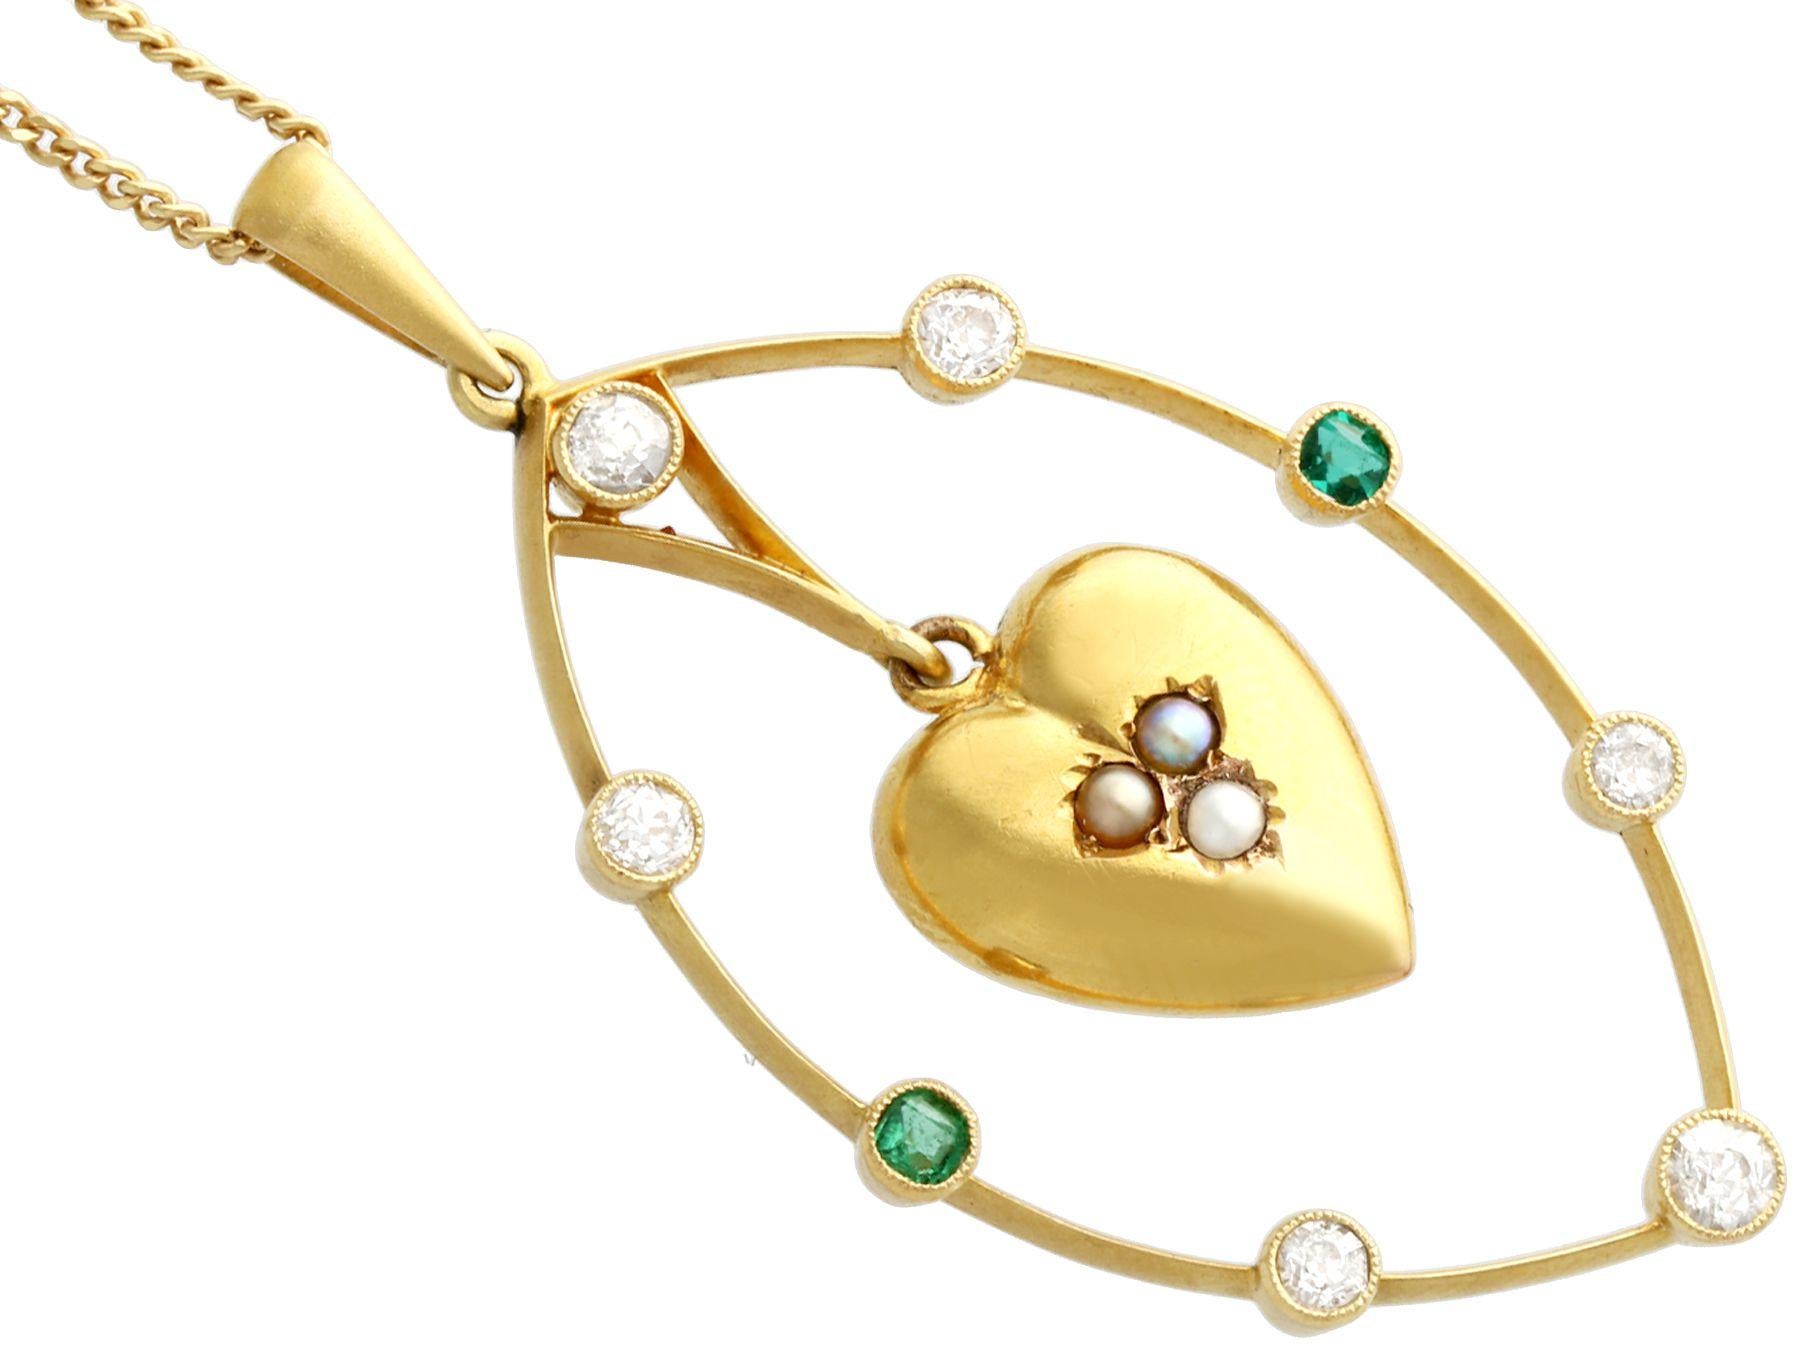 Round Cut Diamond, Emerald, Seed Pearl and Yellow Gold Heart Pendant